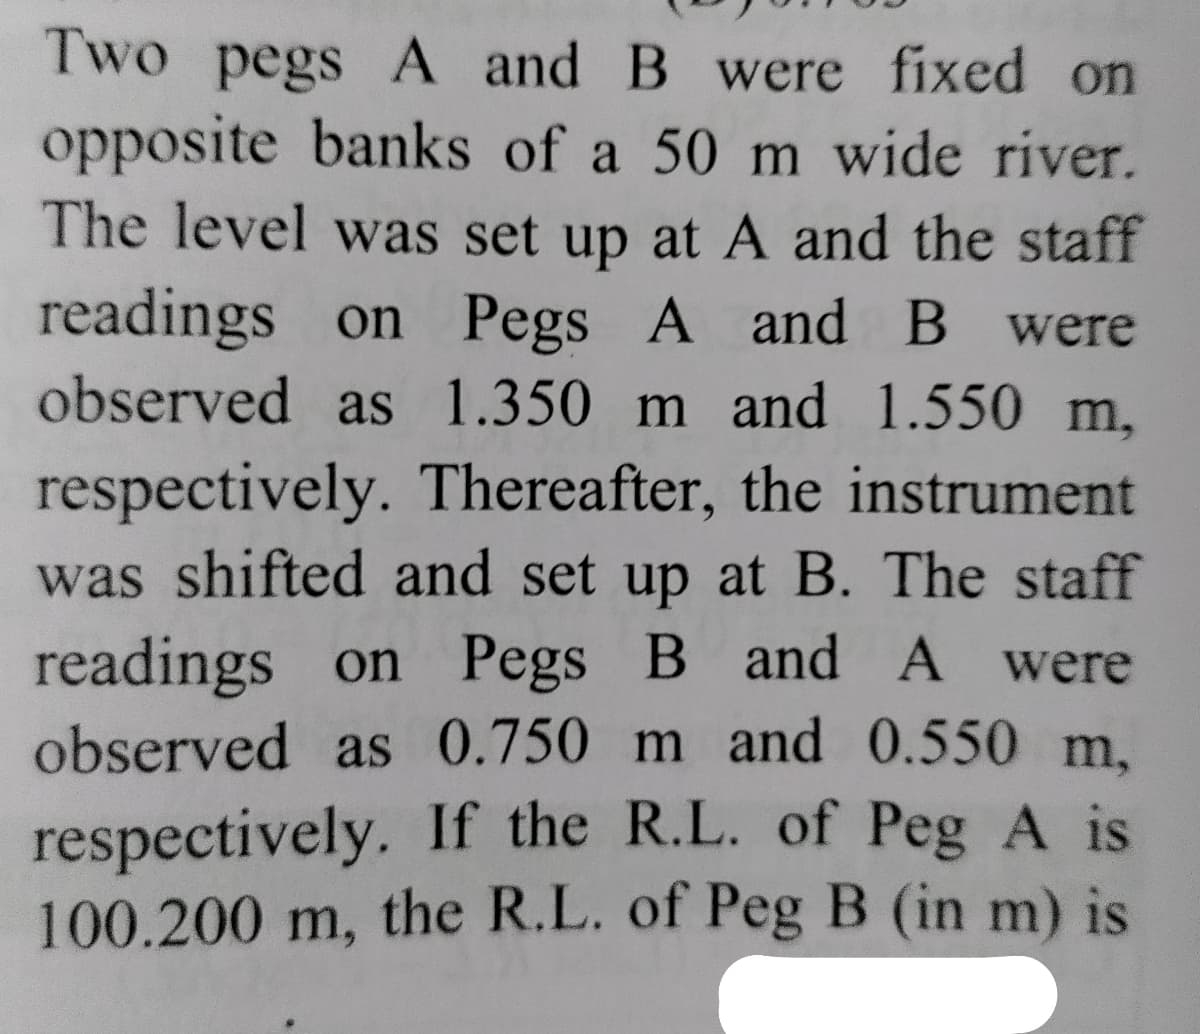 Two pegs A and B were fixed on
opposite banks of a 50 m wide river.
The level was set up at A and the staff
readings on Pegs A and B were
observed as 1.350 m and 1.550 m,
respectively. Thereafter, the instrument
was shifted and set up at B. The staff
readings on Pegs B and A were
observed as 0.750 m and 0.550 m,
respectively. If the R.L. of Peg A is
100.200 m, the R.L. of Peg B (in m) is
